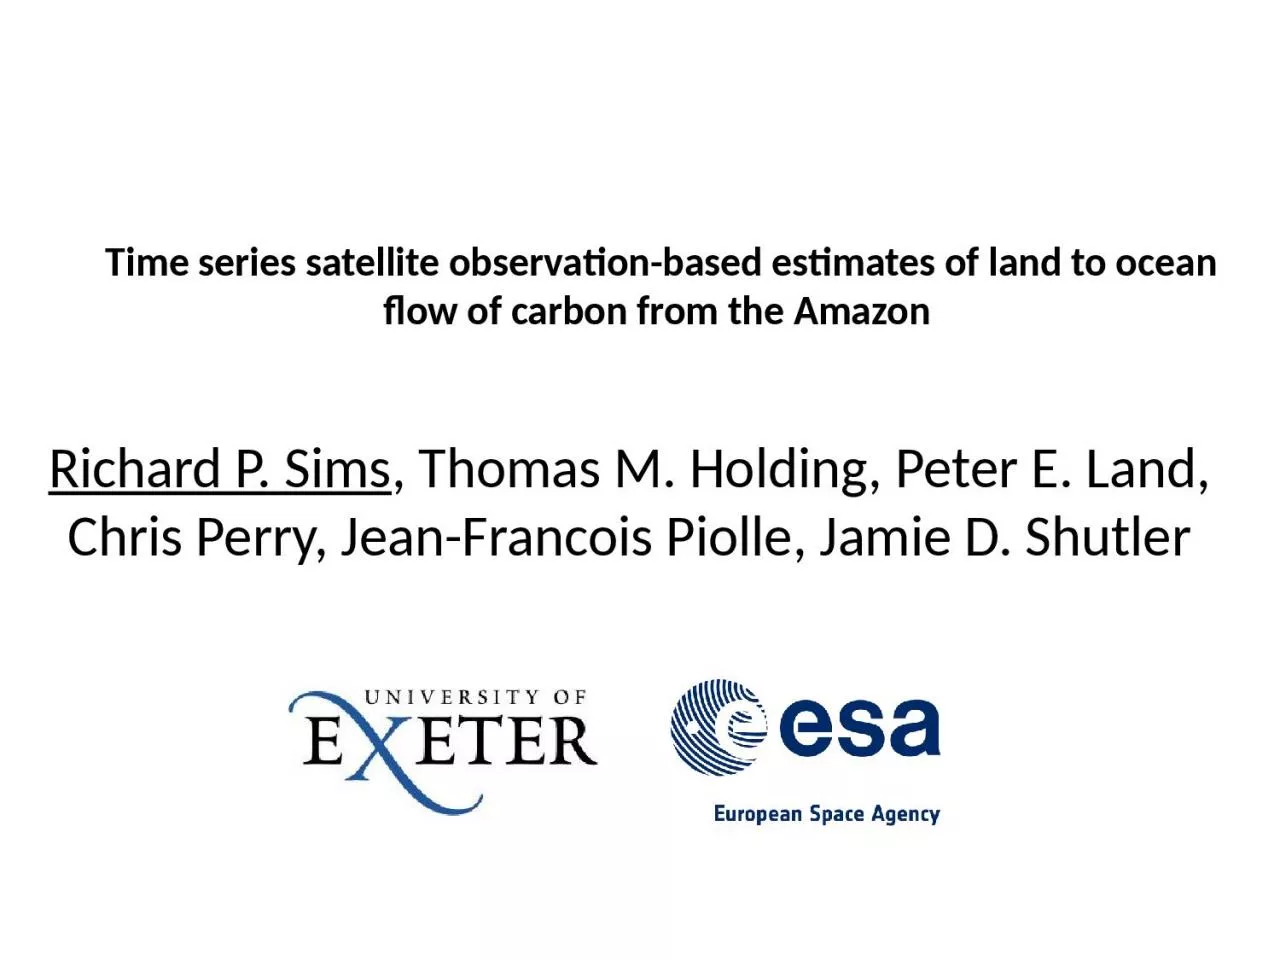 Time series satellite observation-based estimates of land to ocean flow of carbon from